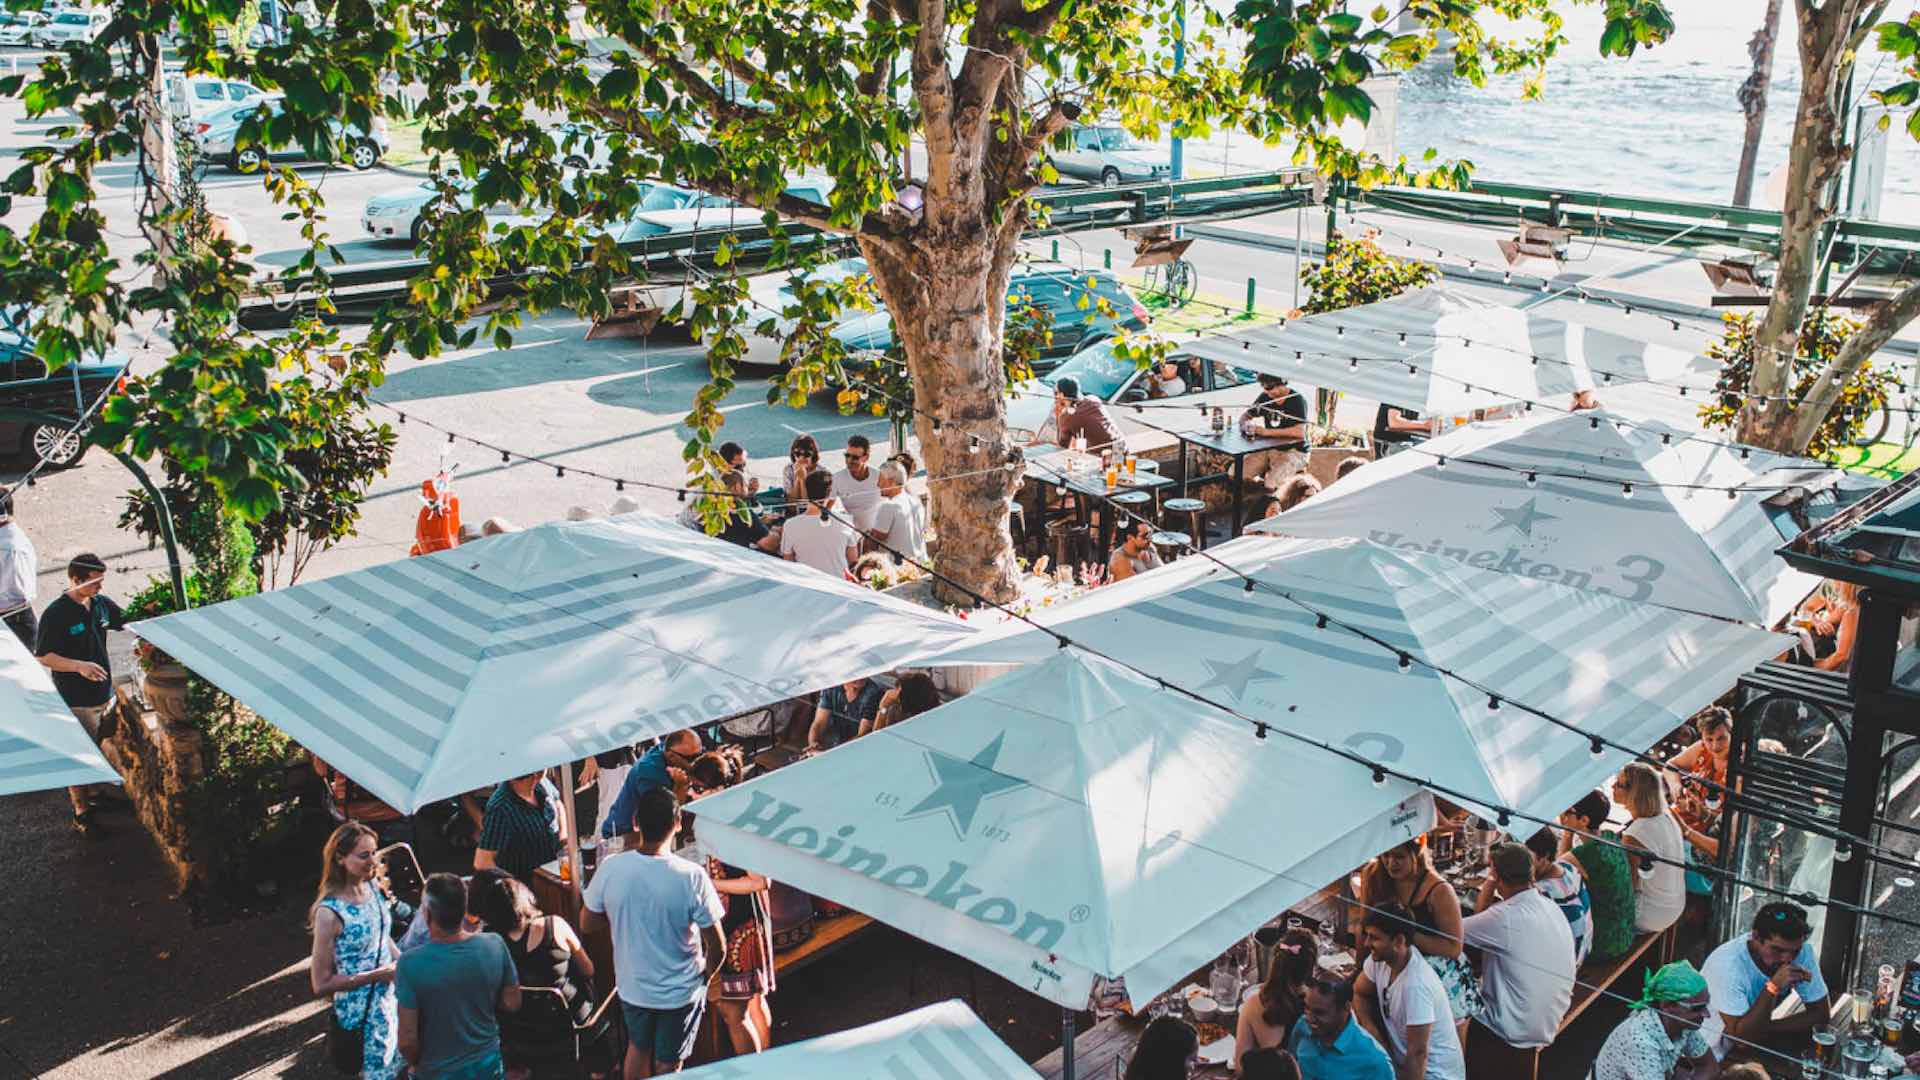 Four Perth Beer Gardens Where You Can Soak Up the Sun